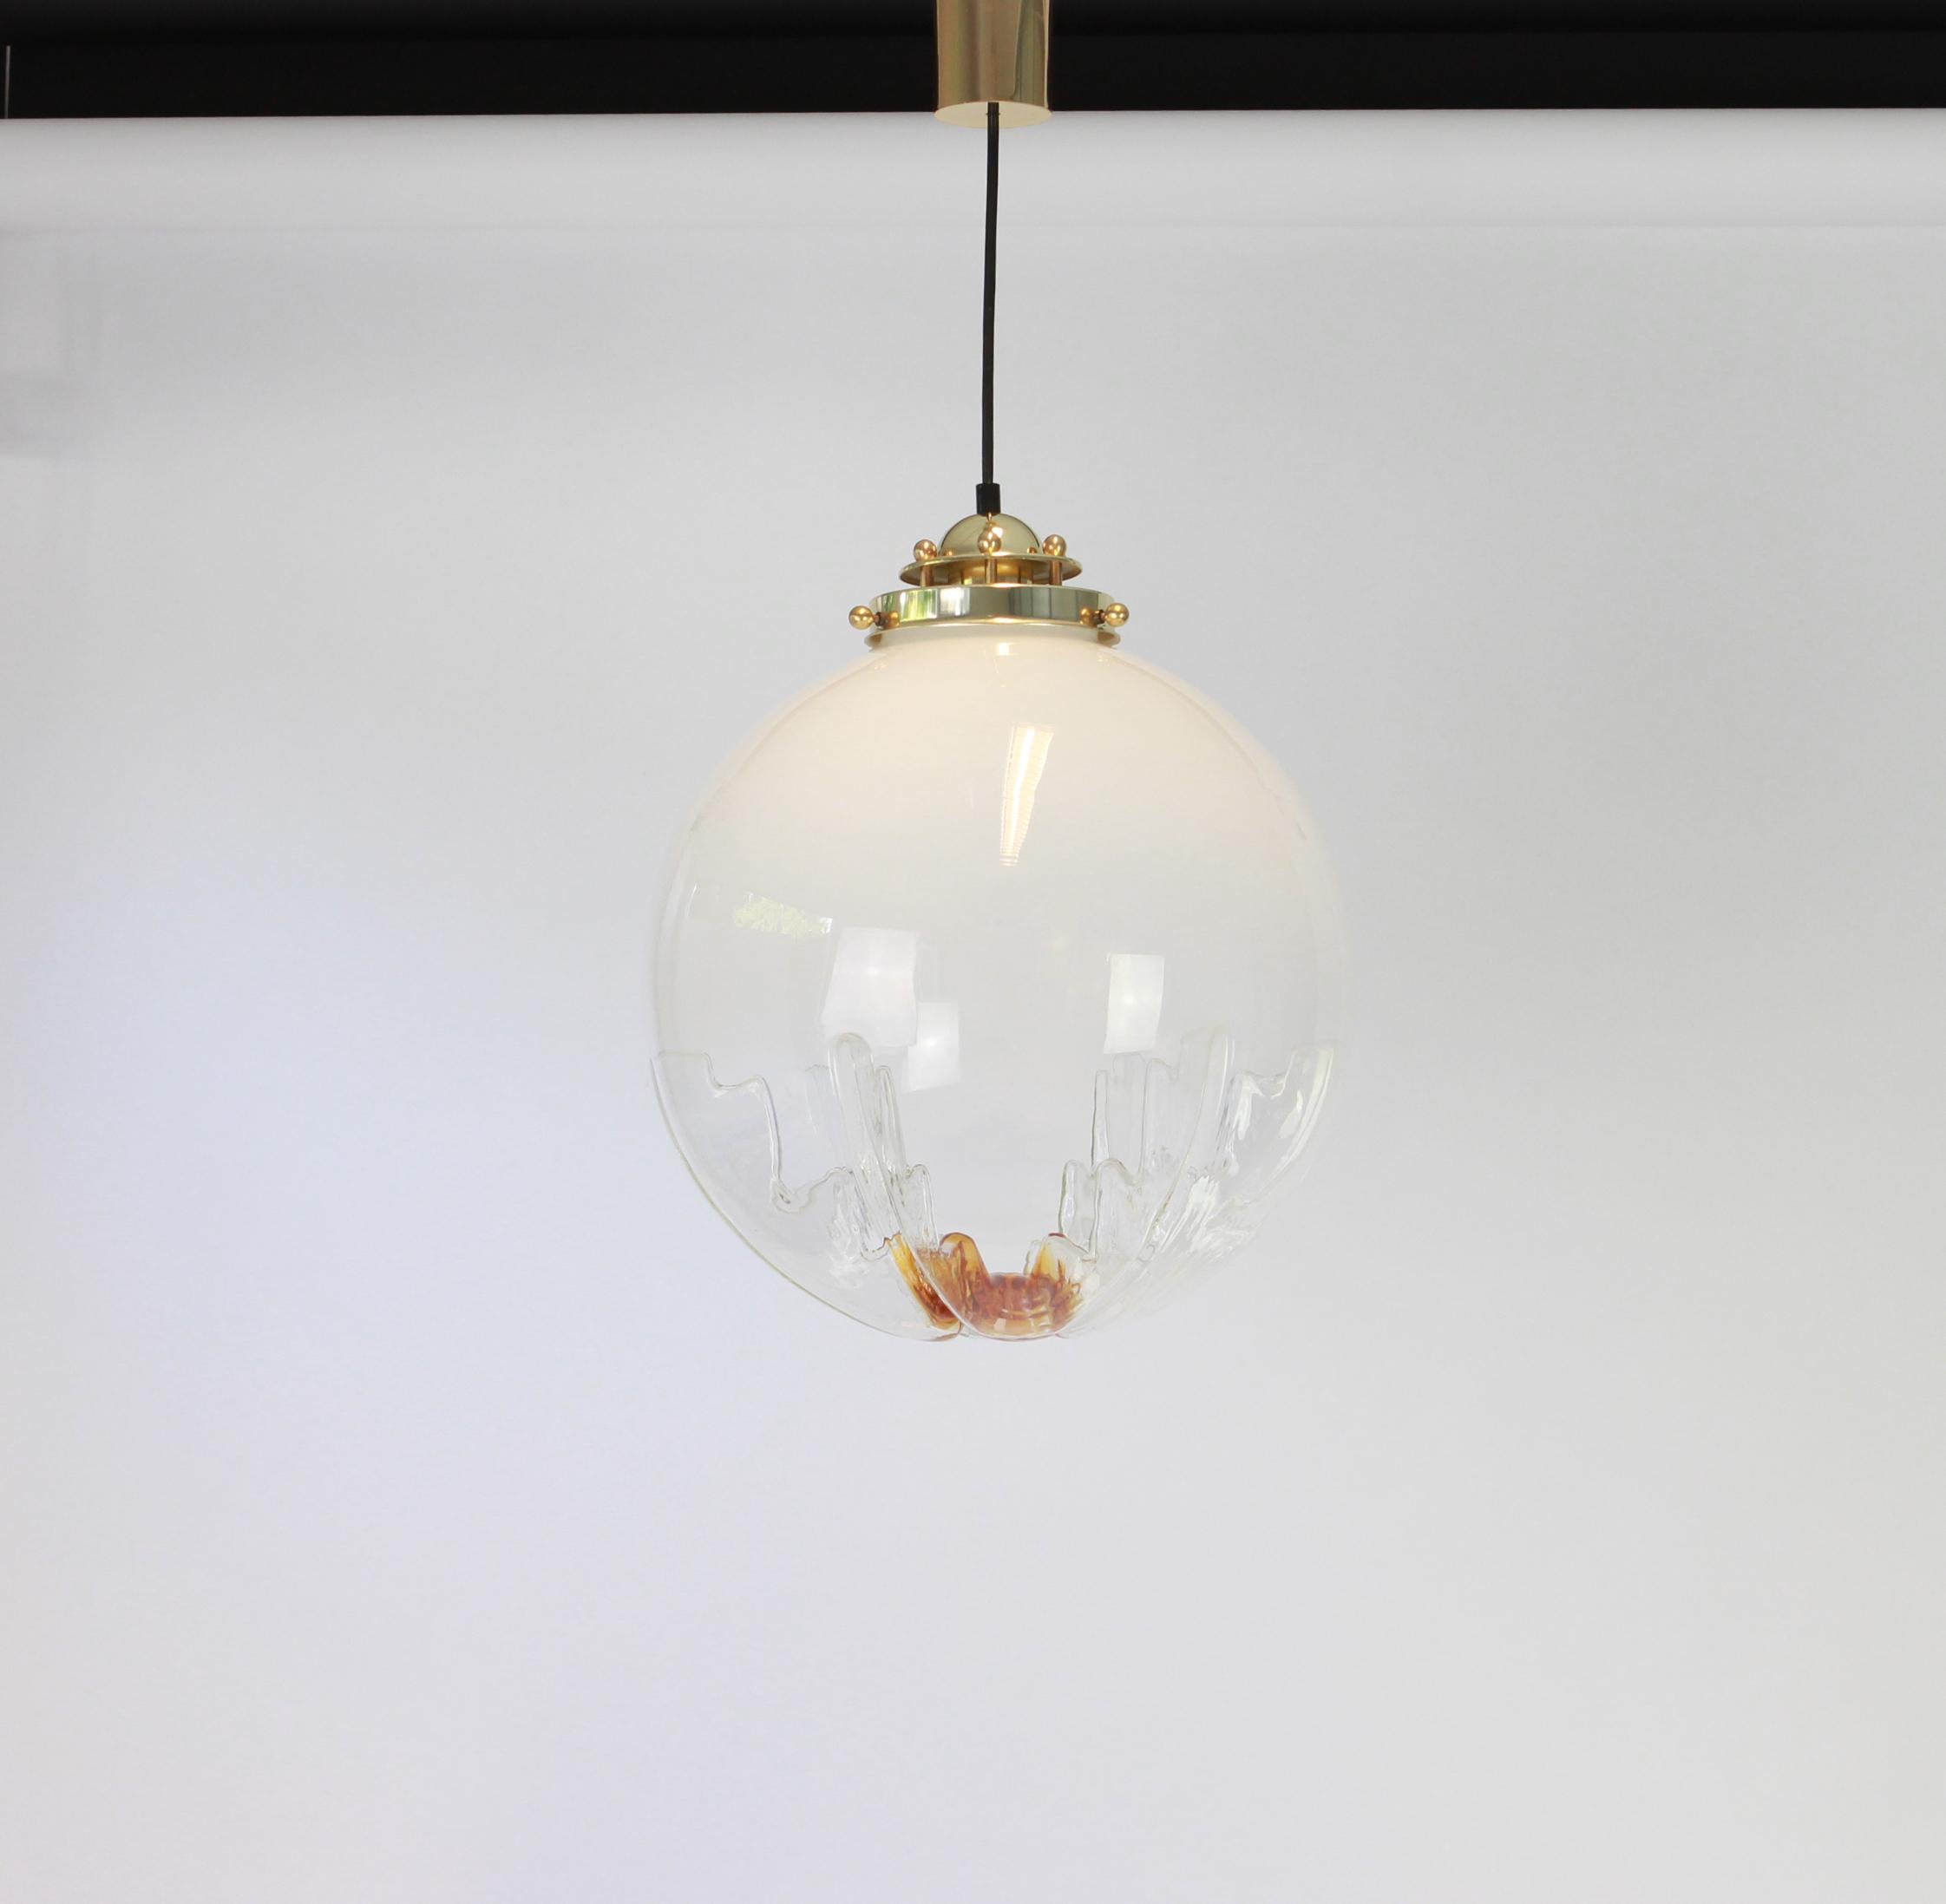 Ceiling light with large volcanic Murano crystal glass dome on golden aluminum base. 
Wonderful light effect.
High quality and in very good condition. Cleaned, well-wired and ready to use. 
The fixture requires 1 x E27 Standard bulbs with 100W max